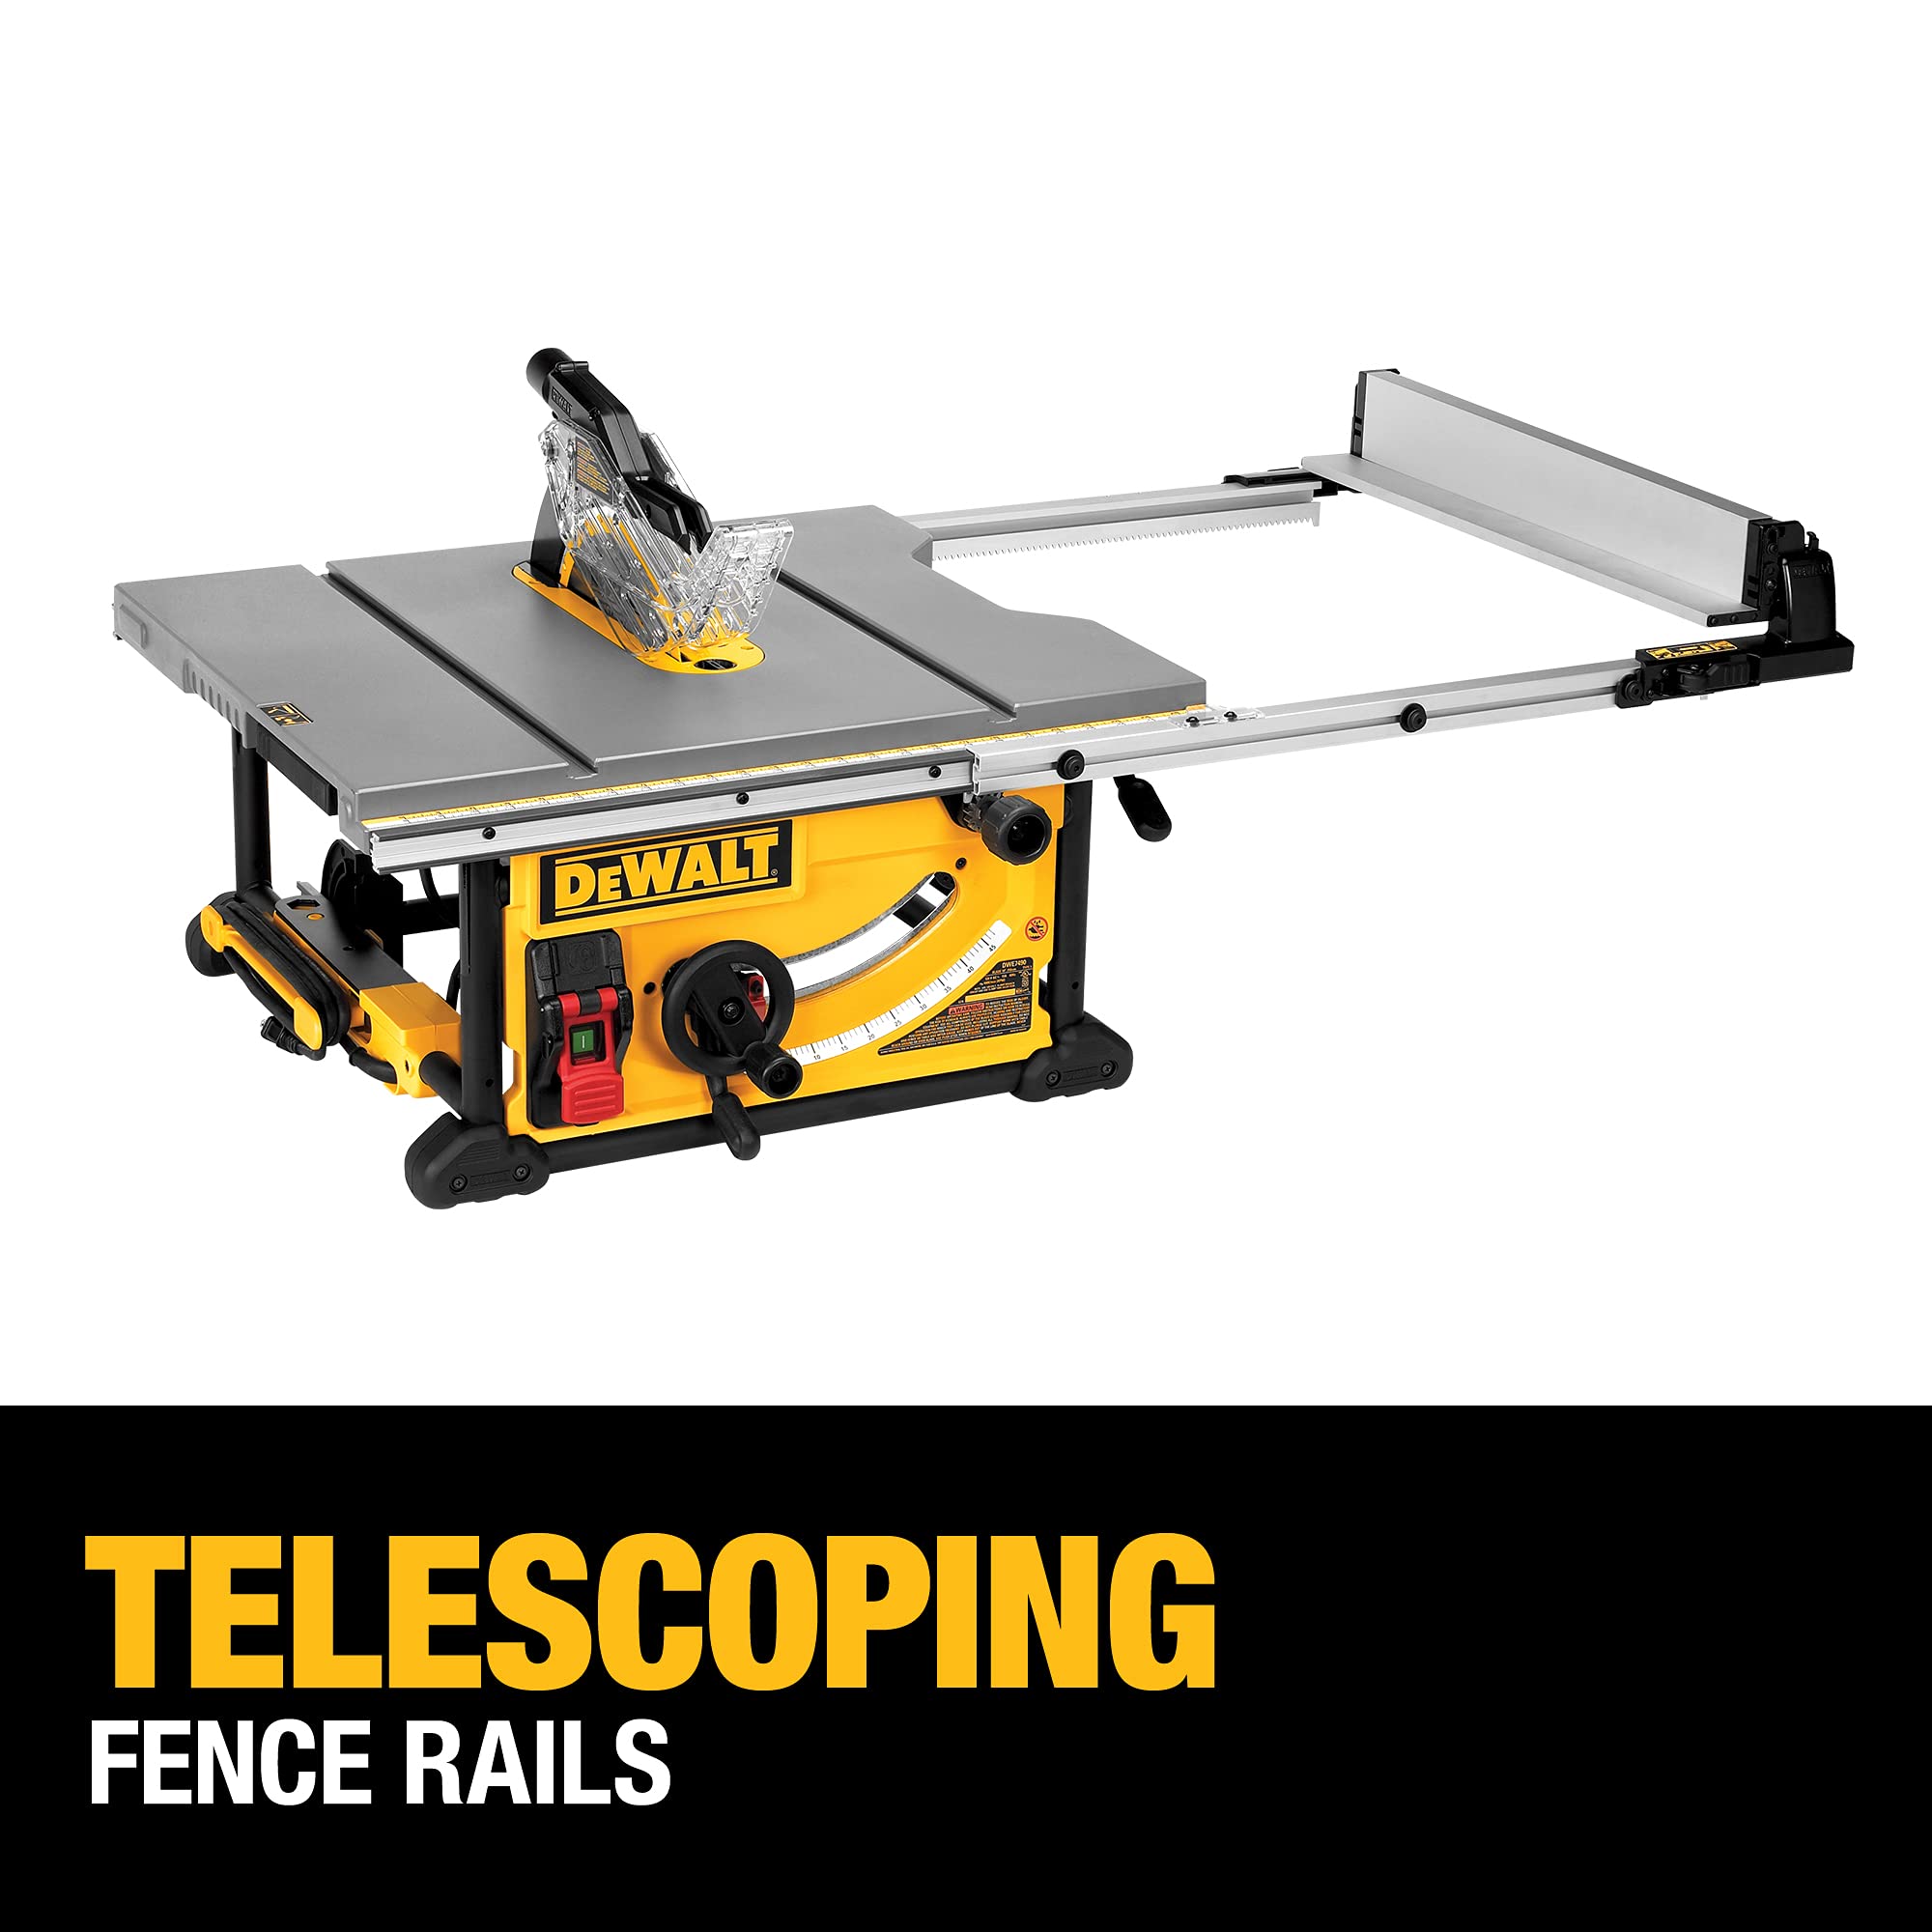 DEWALT Table Saw, 10 Inch, 32-1/2 Inch Rip Capacity, 15 Amp Motor, With Rolling/Collapsible Stand (DWE7491RS)